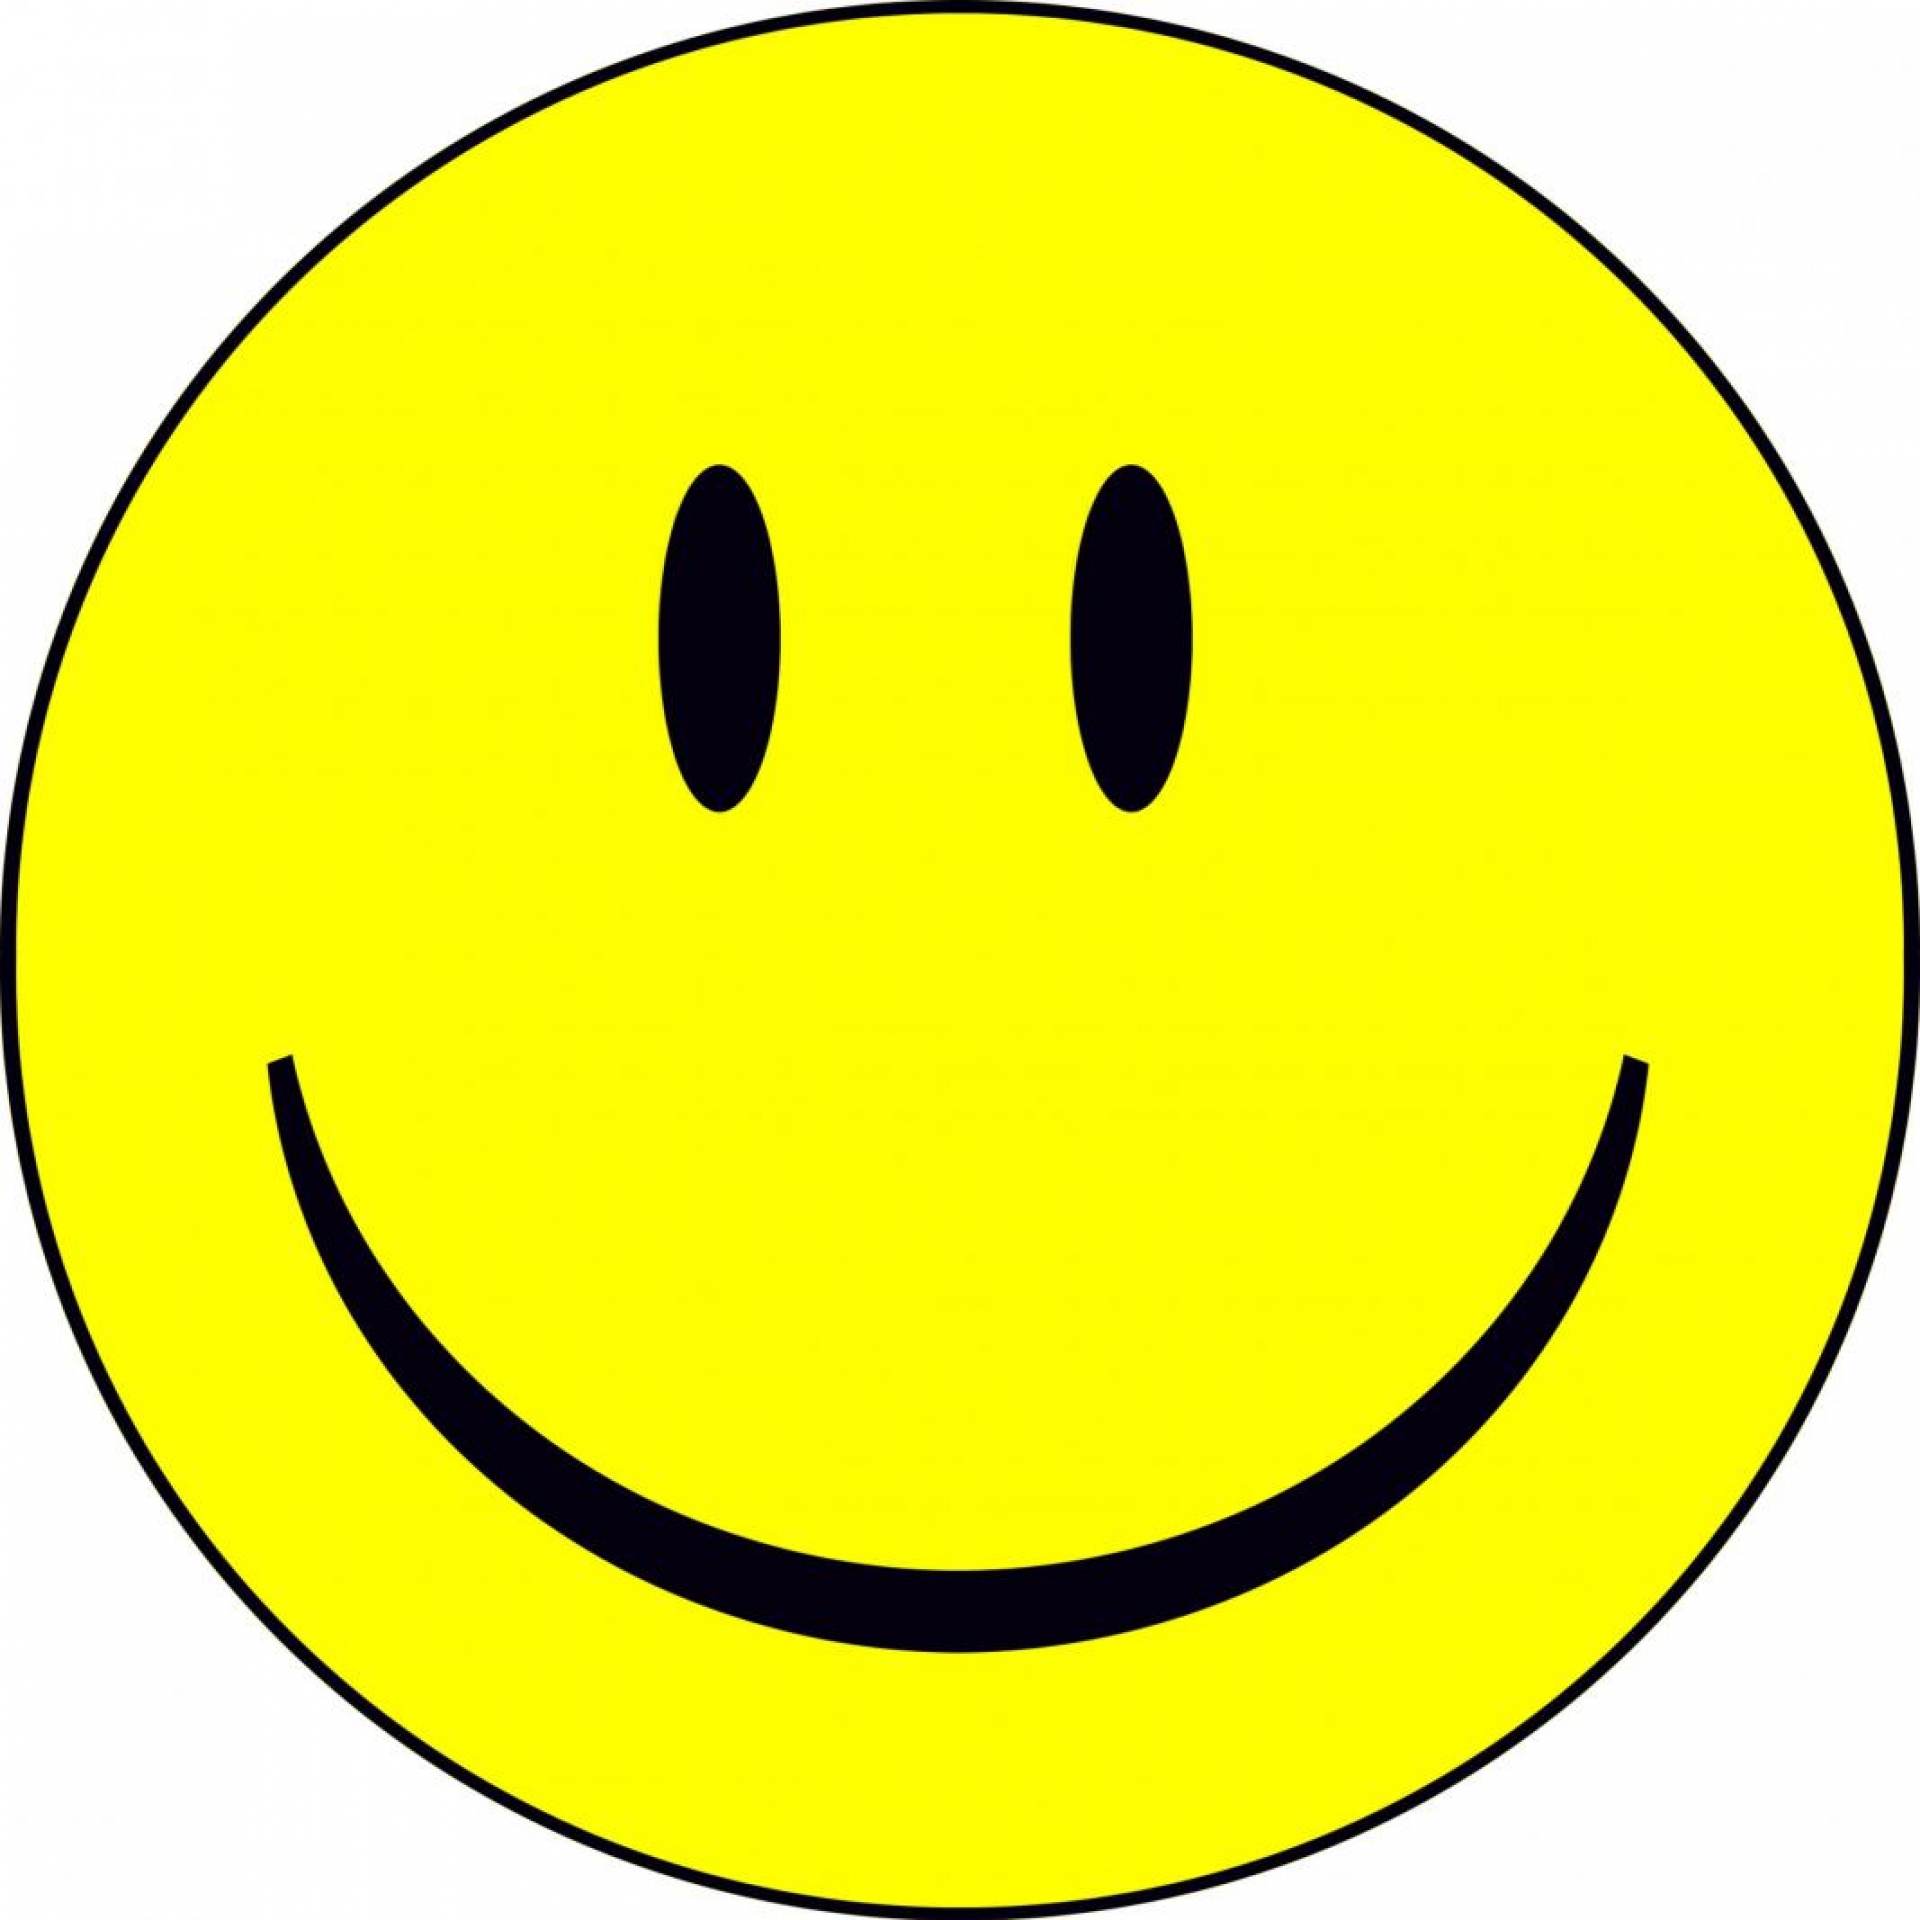 Crazy Smiley Smile Day Site - ClipArt Best - ClipArt Best